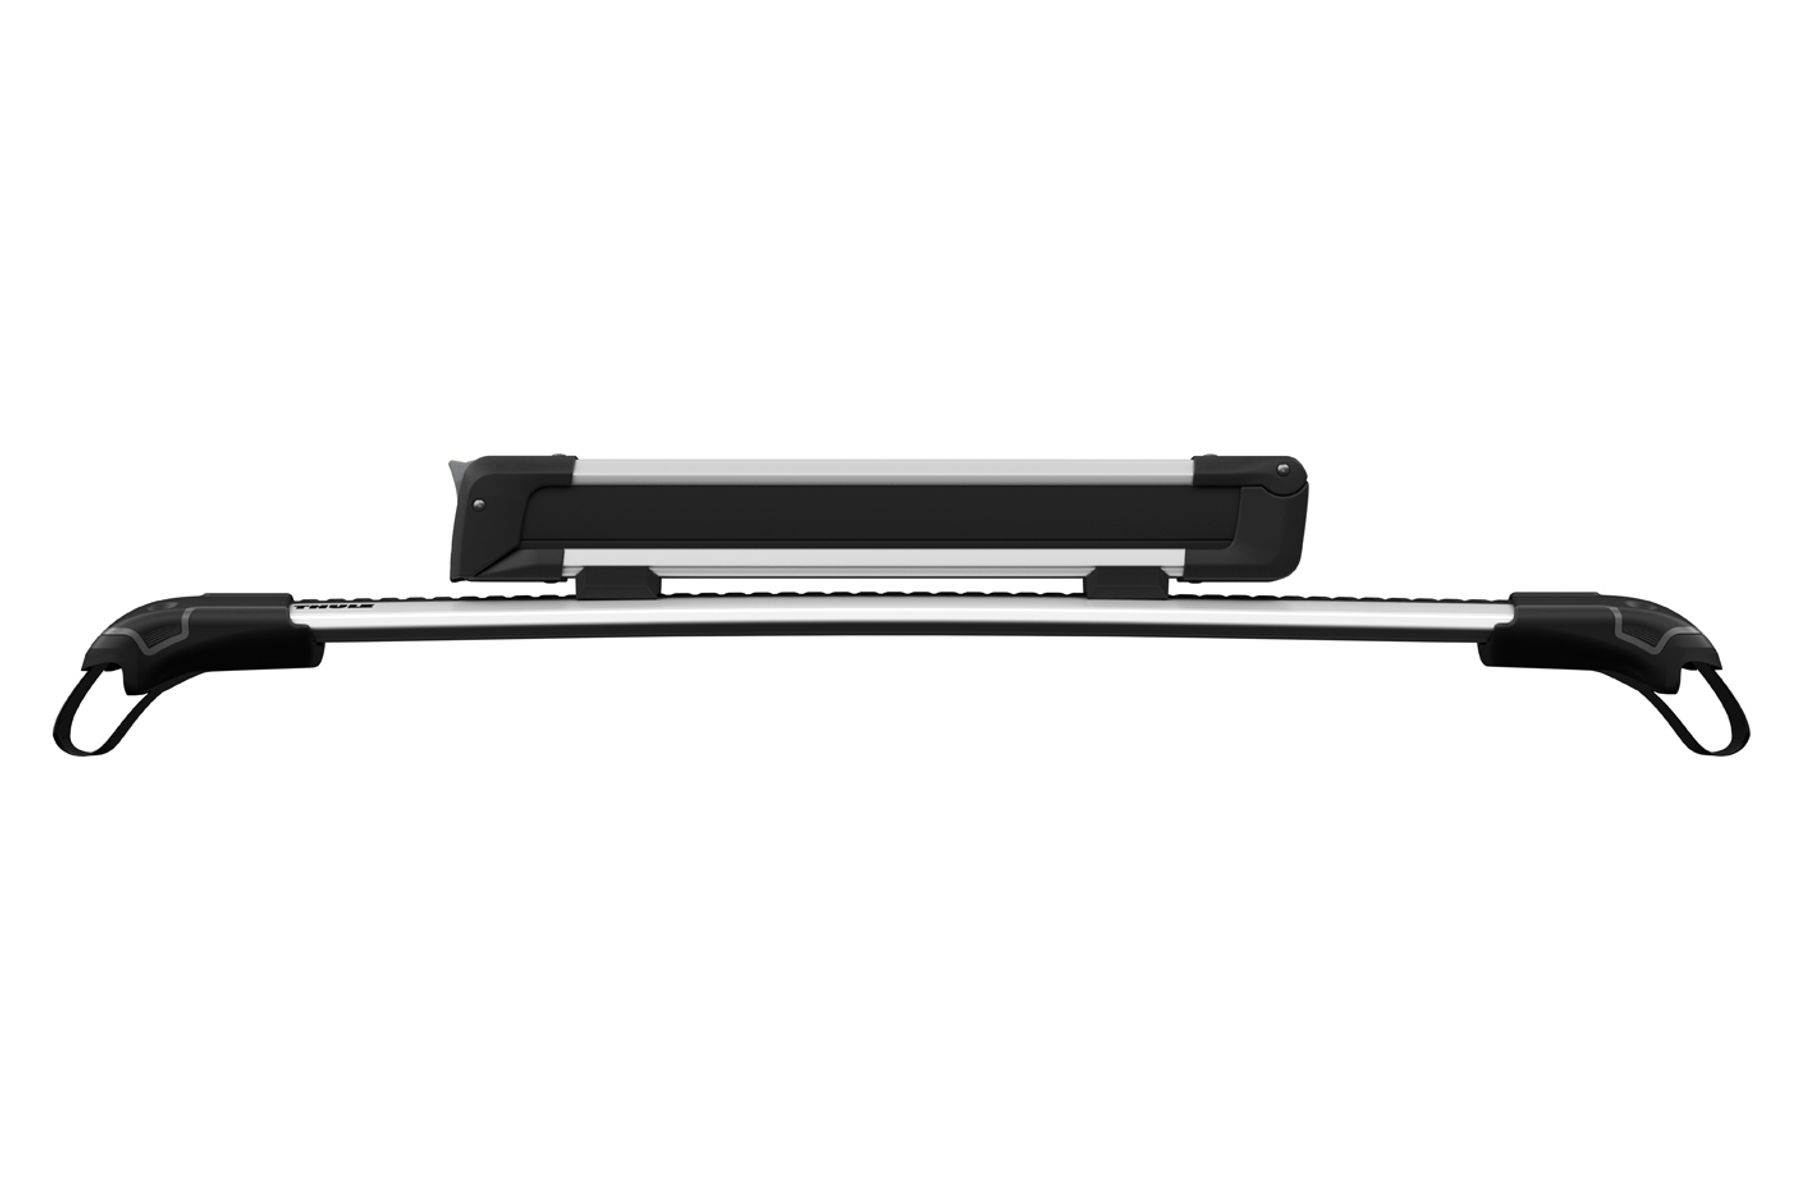 Side view of ski rack Thule SnowPack with low feet